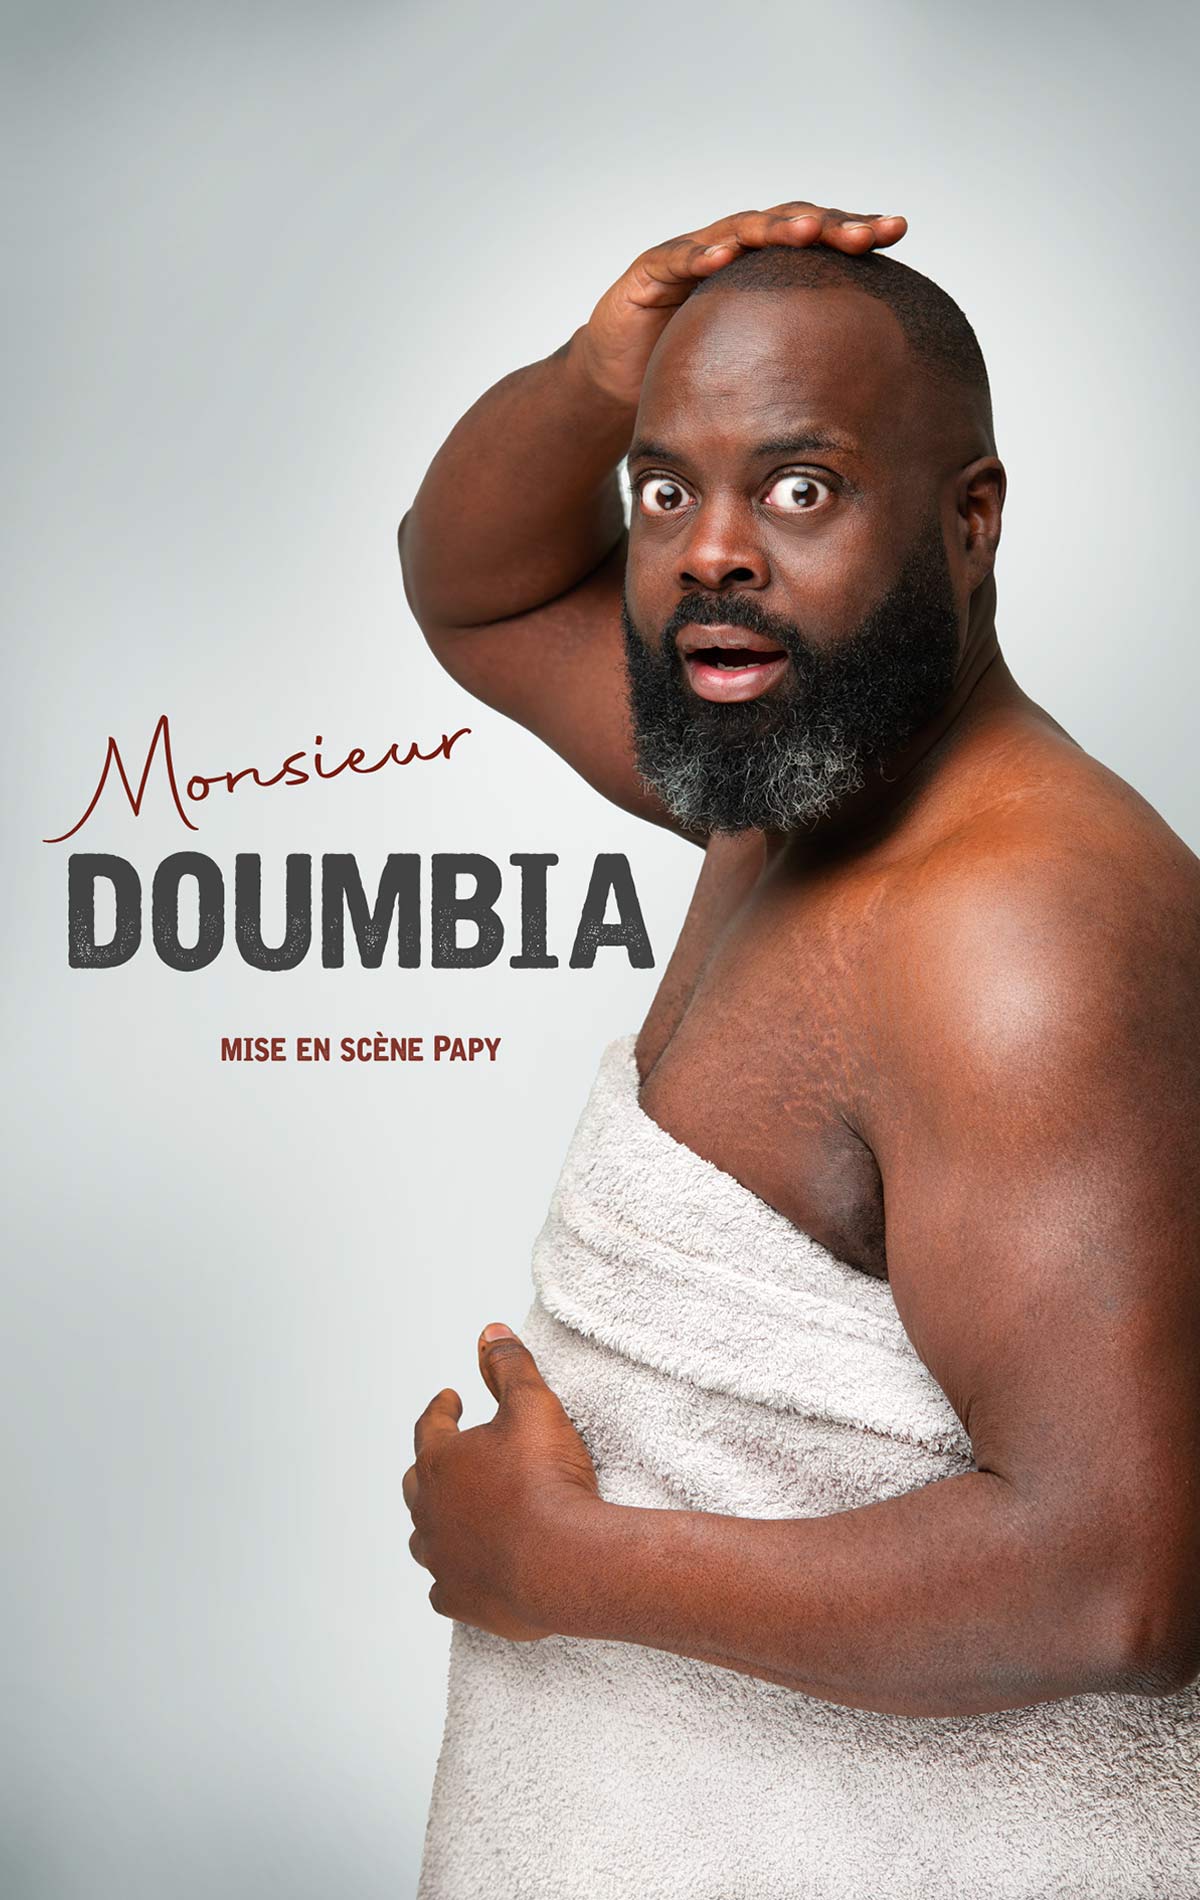 Issa Doumbia al Casino Barriere Toulouse Tickets